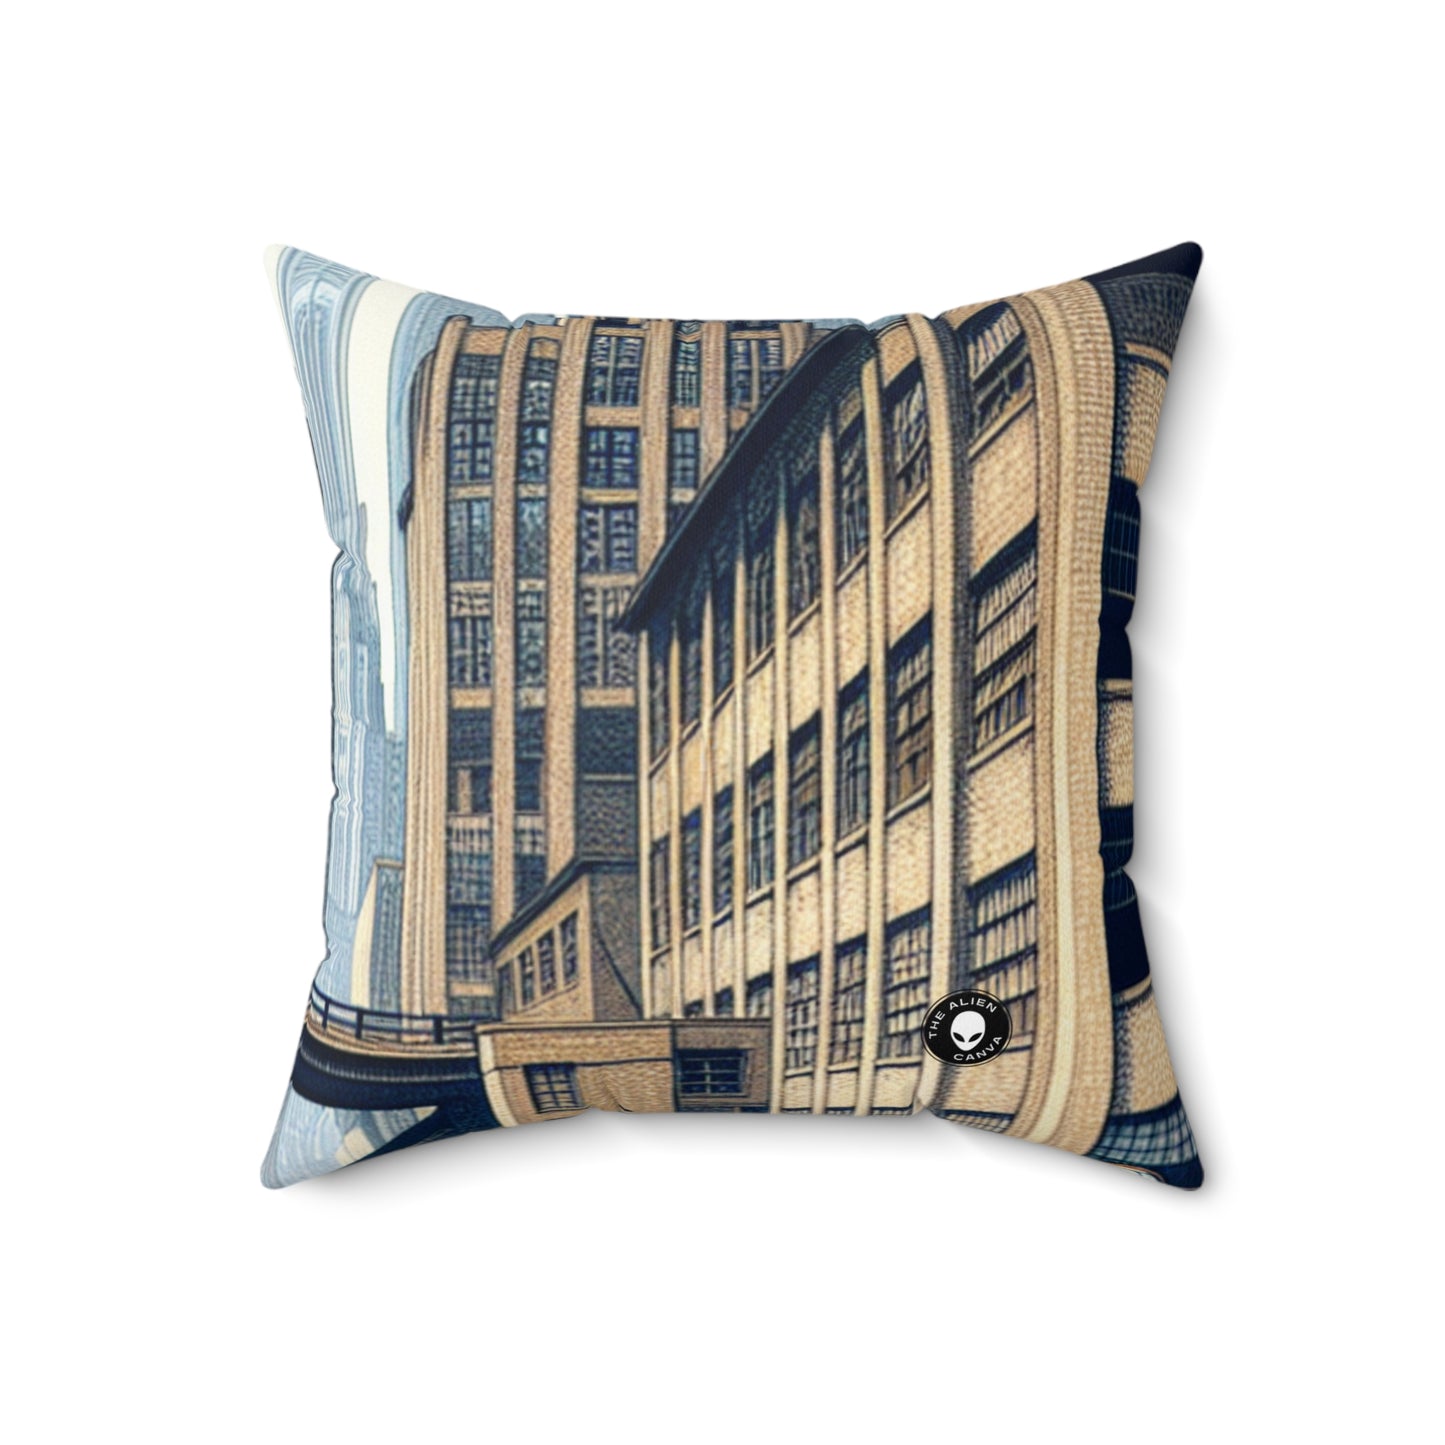 "Urban Geometry: A Modern Cityscape in New Objectivity"- The Alien Spun Polyester Square Pillow New Objectivity